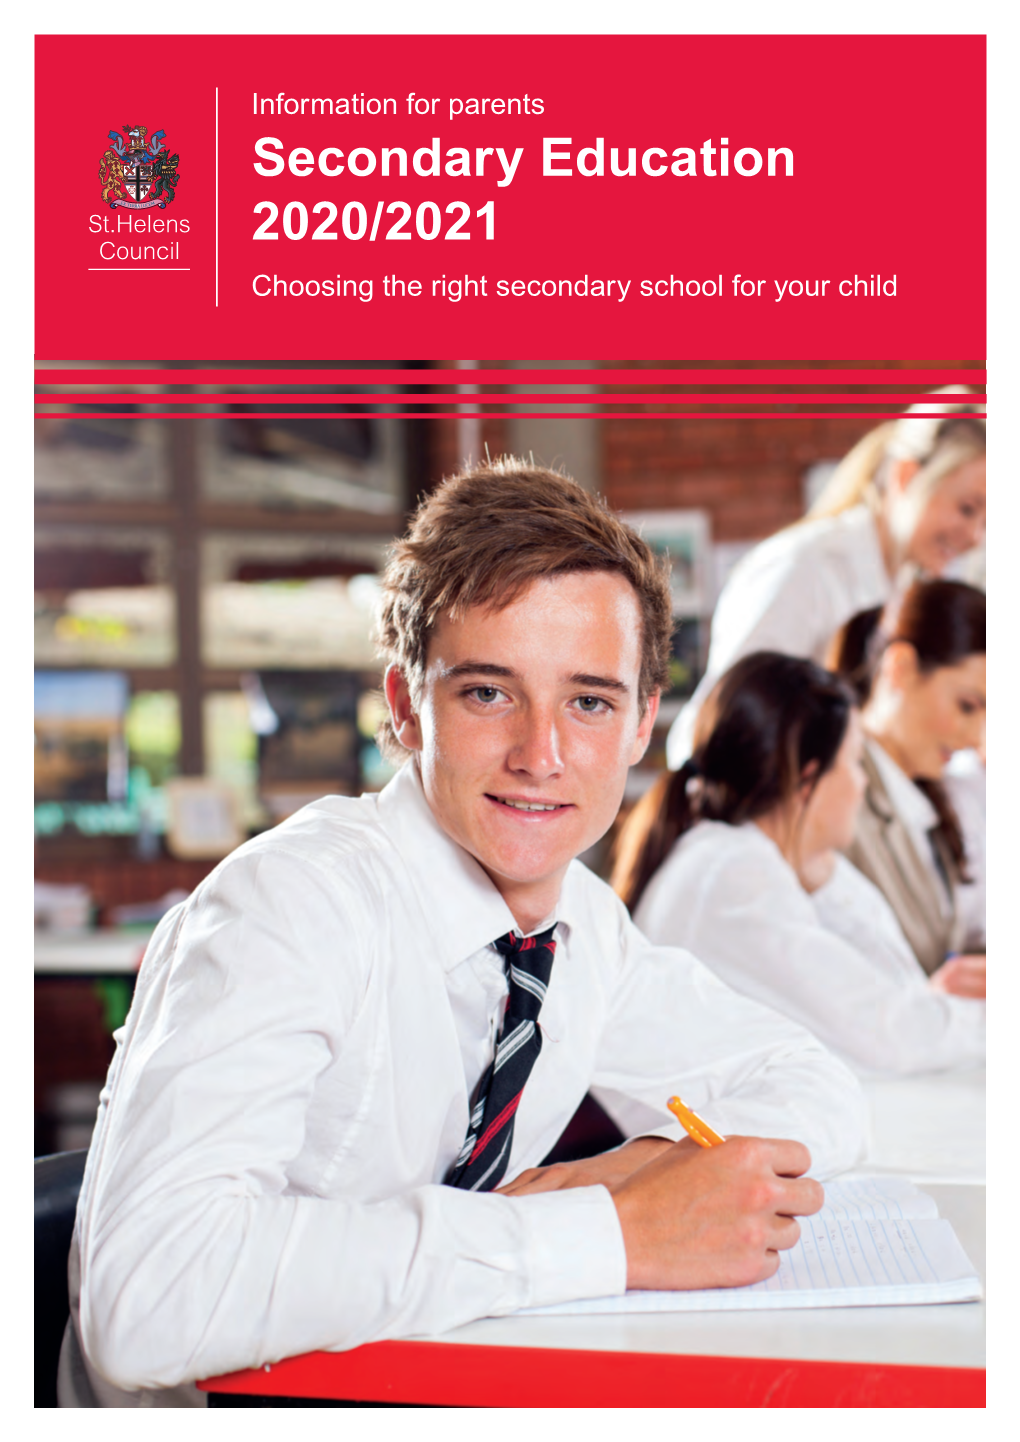 Secondary Education 2020/2021 Choosing the Right Secondary School for Your Child